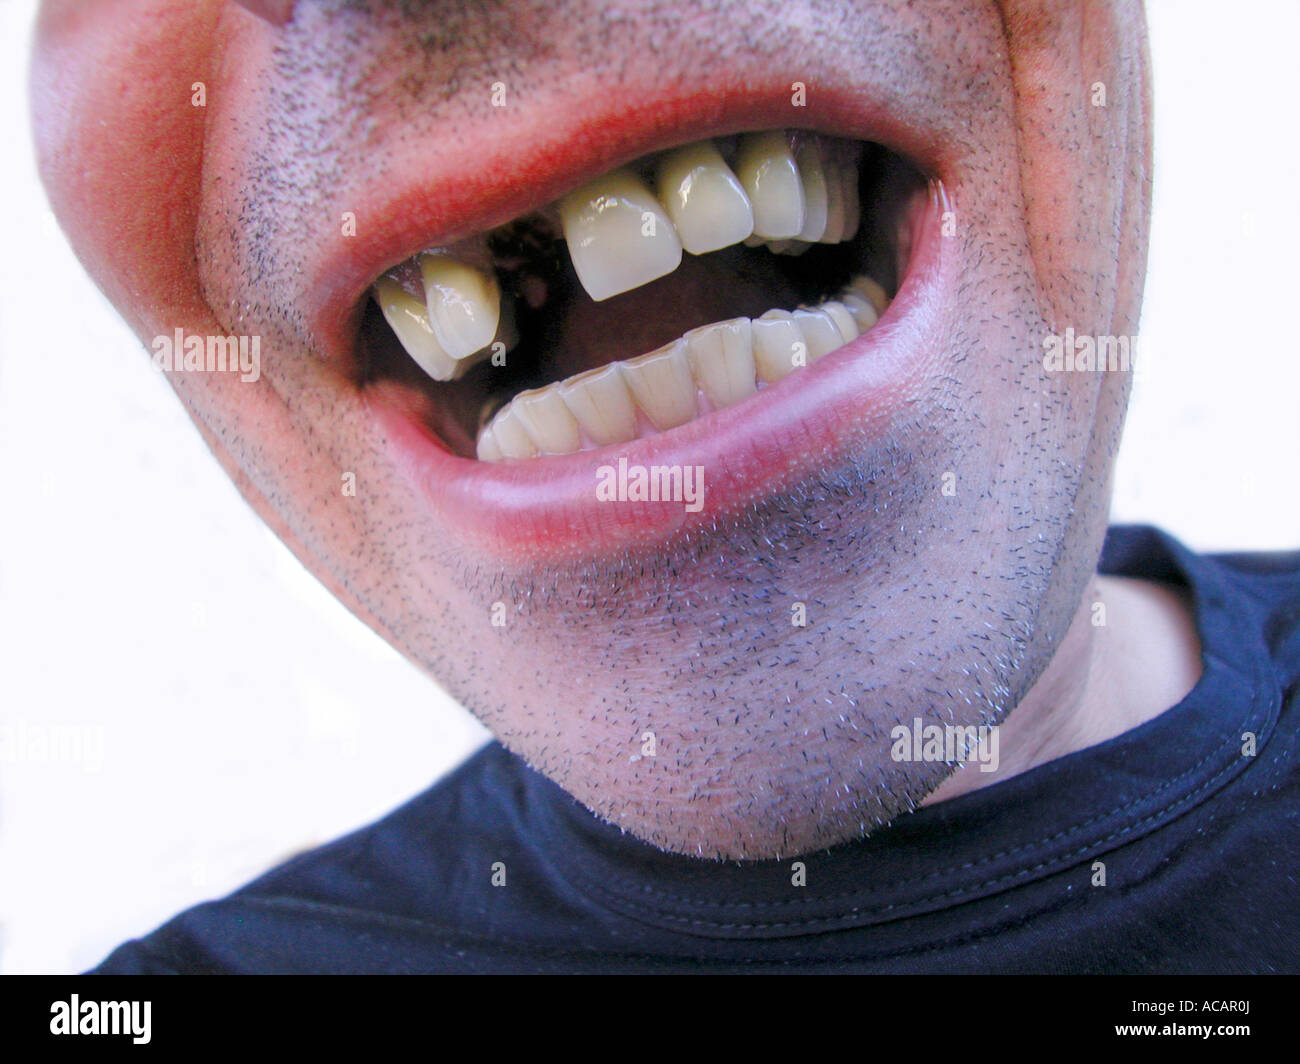 Man with a tooth gap Stock Photo